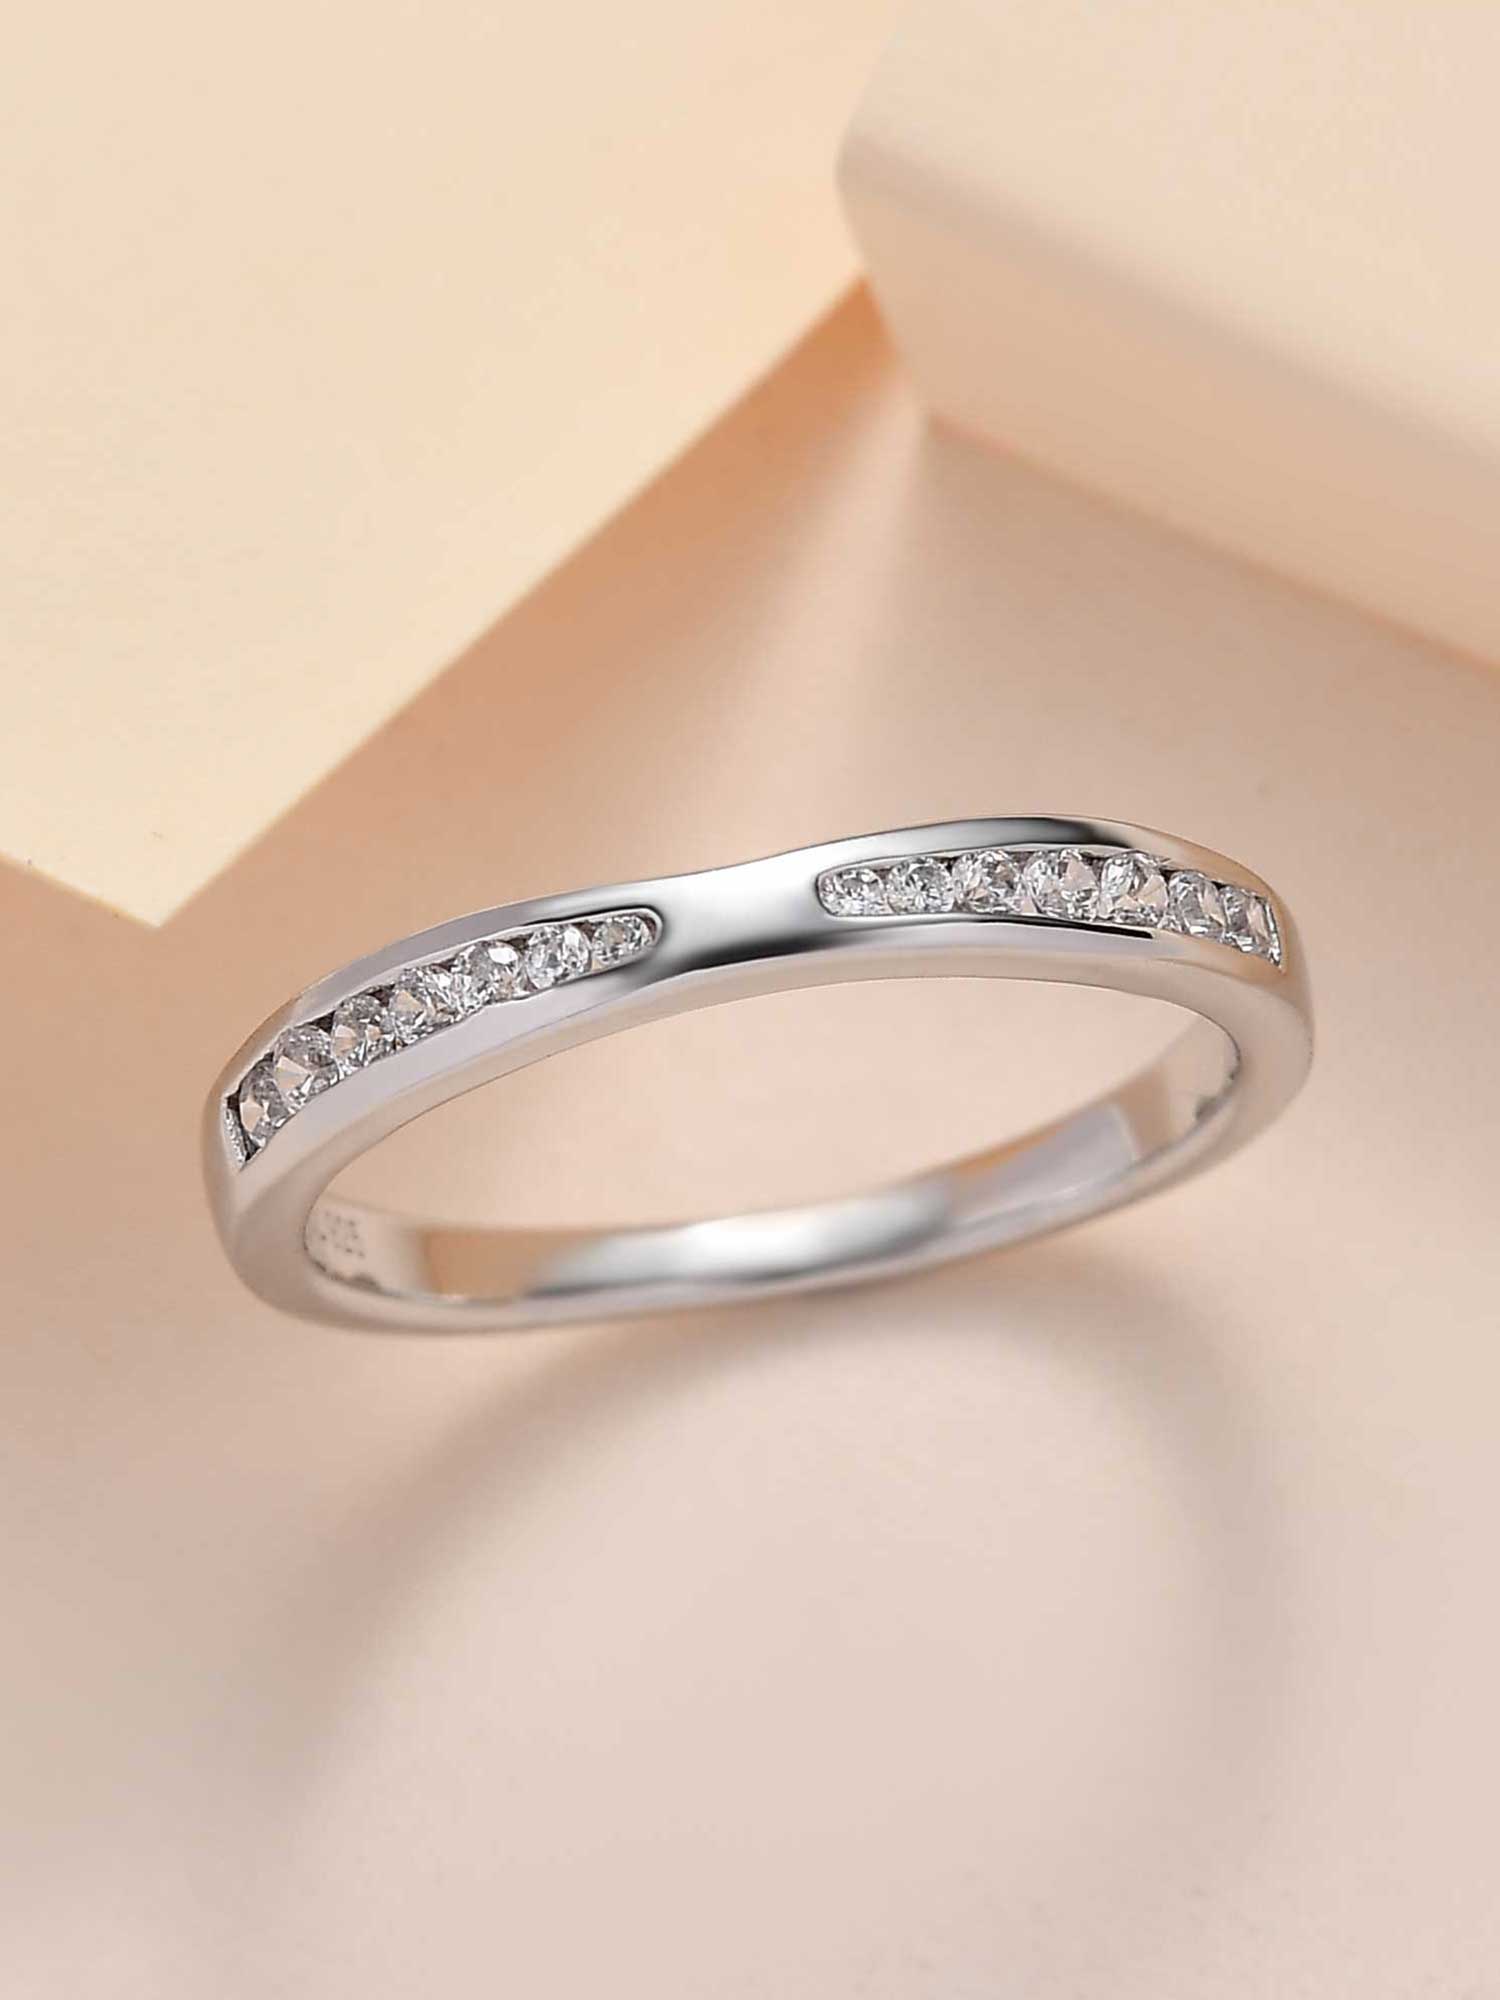 Ornate Engagement Band Ring In Silver